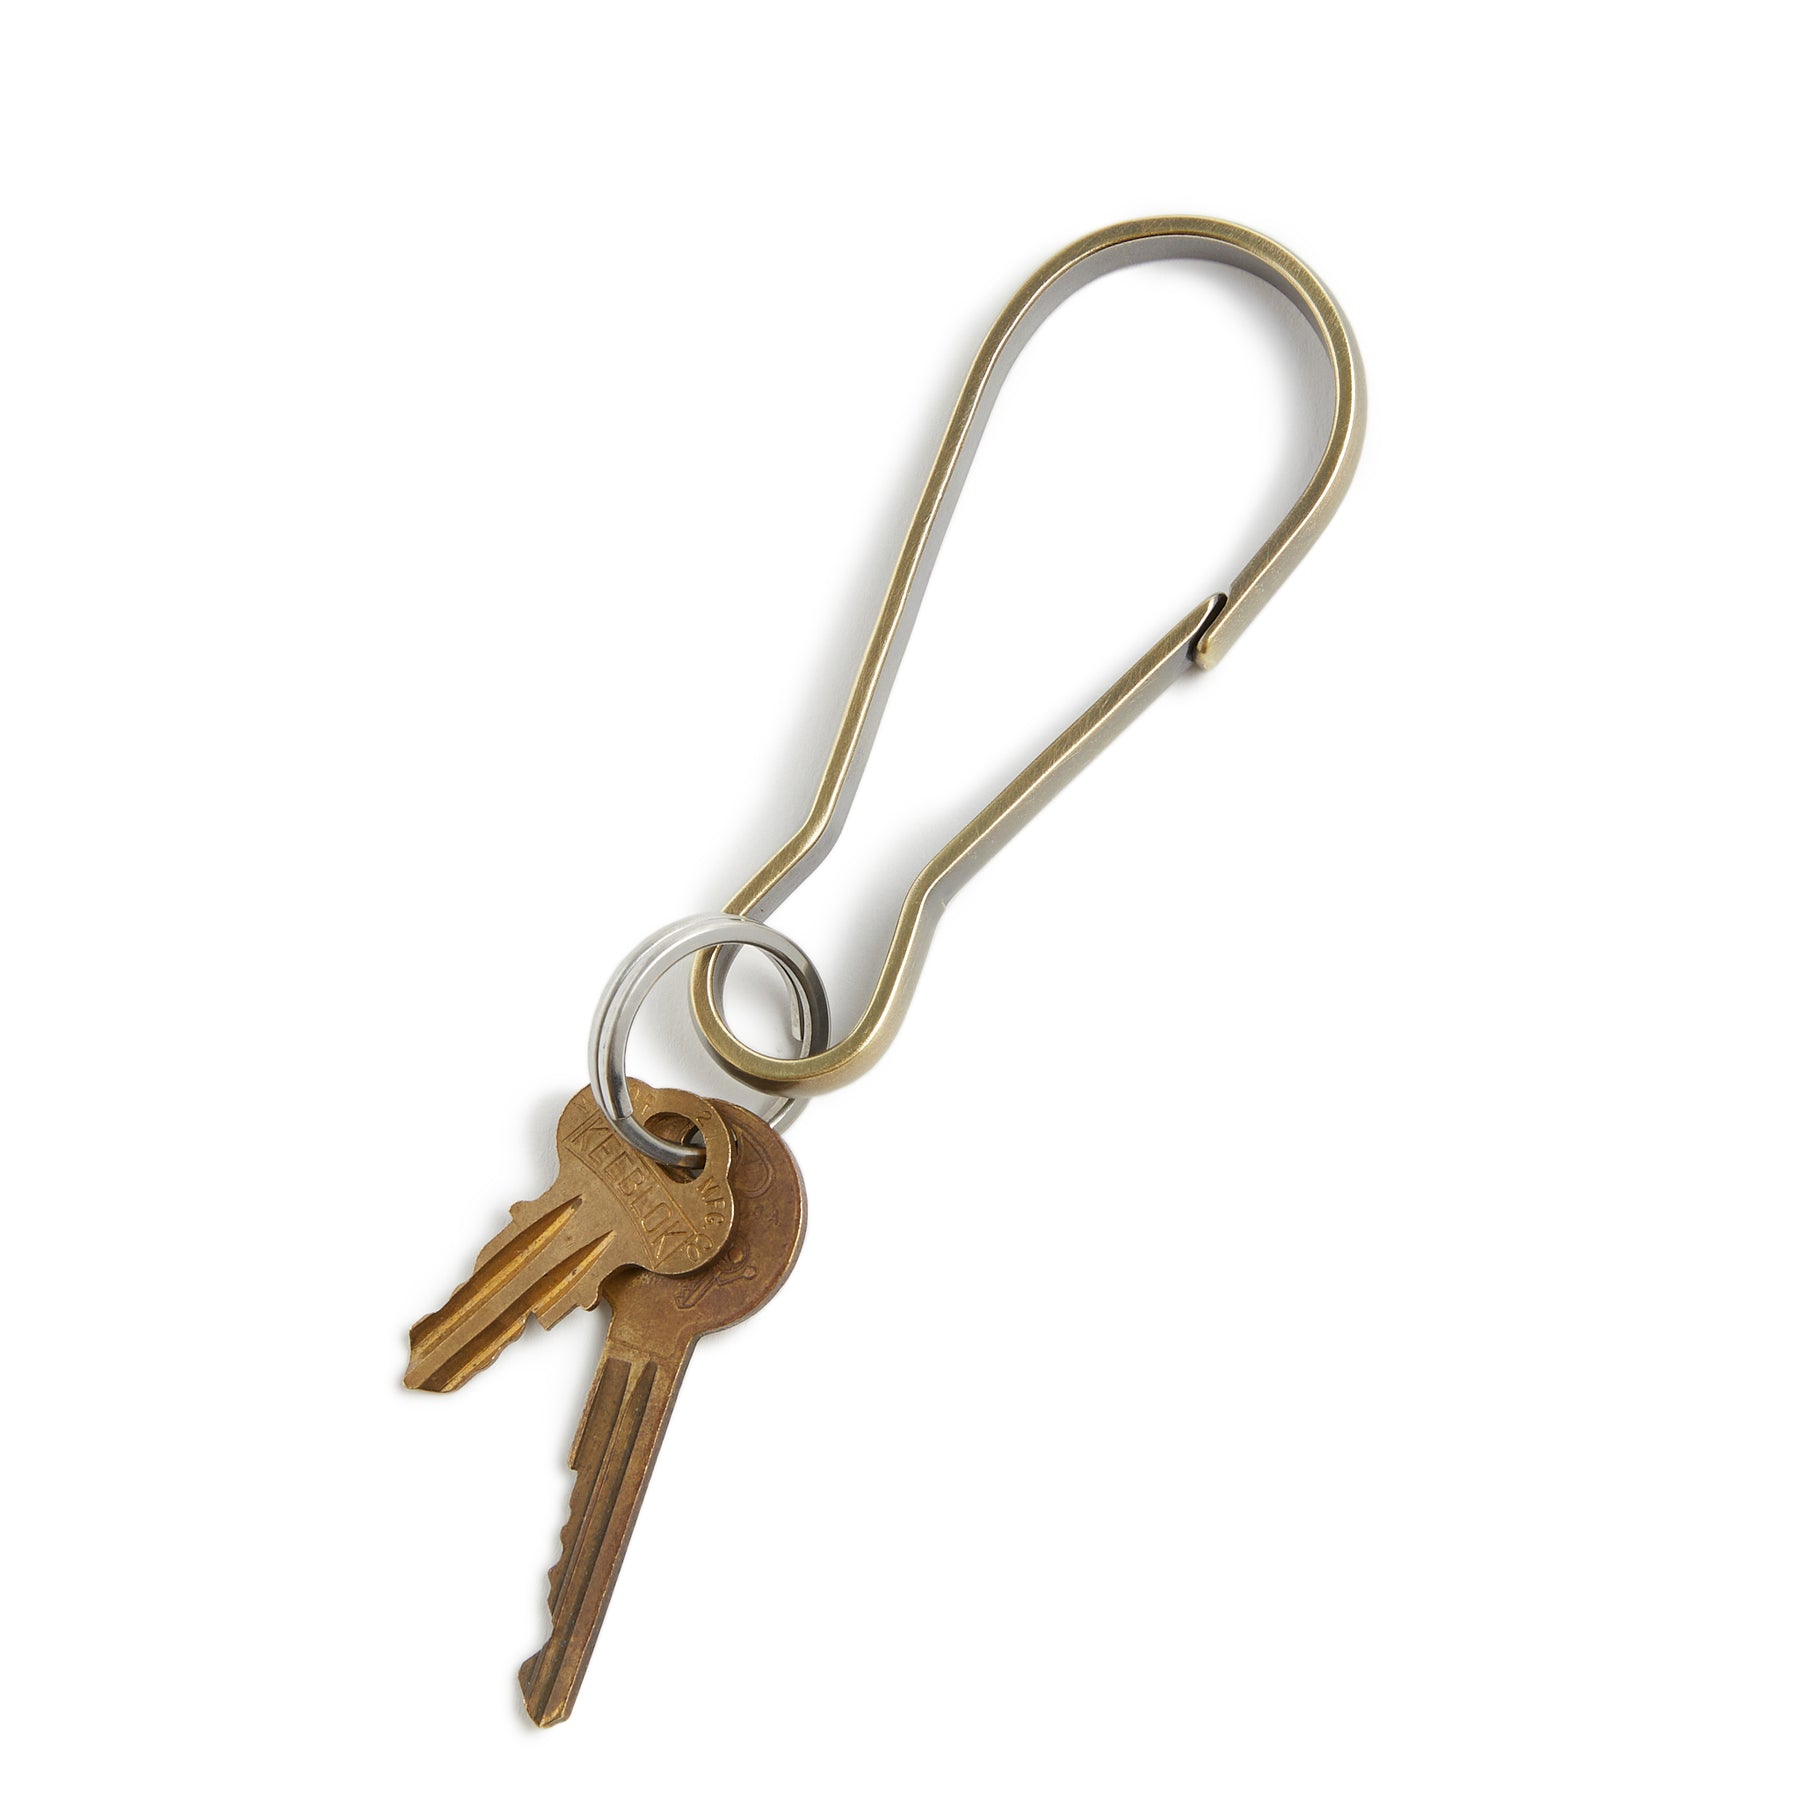 Stainless Steel Key Ring Holder for Food & Beverage Makers